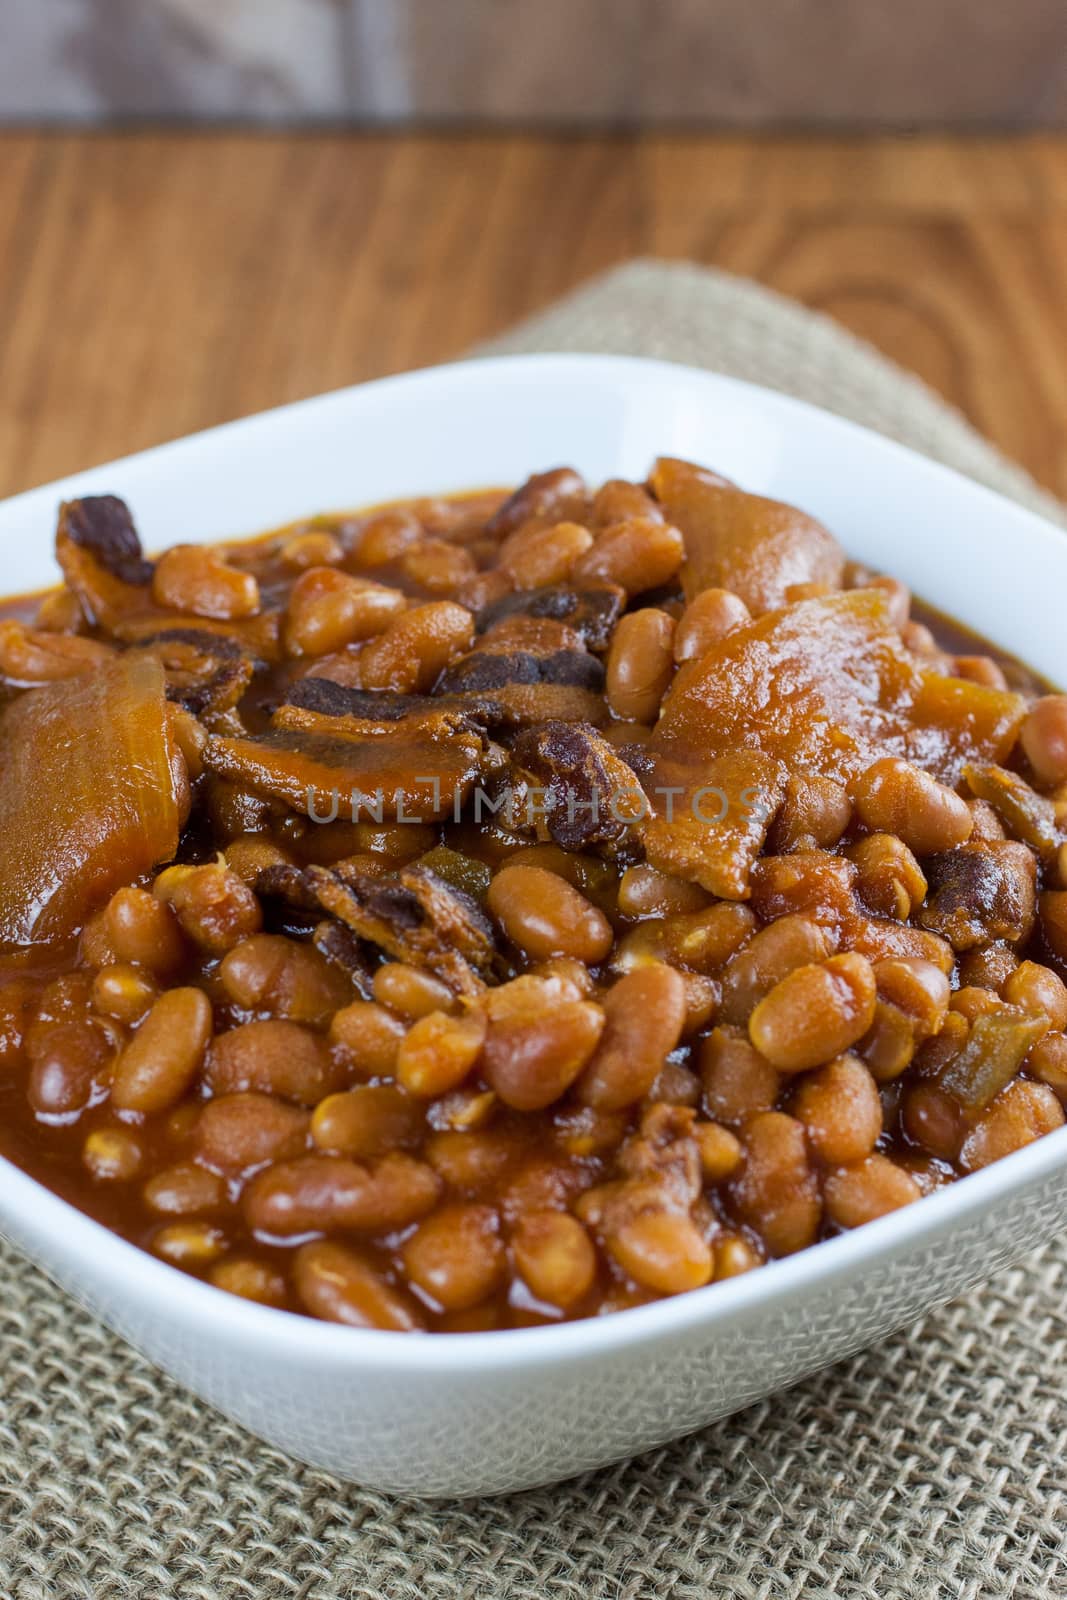 Baked Beans in a bowl by SouthernLightStudios